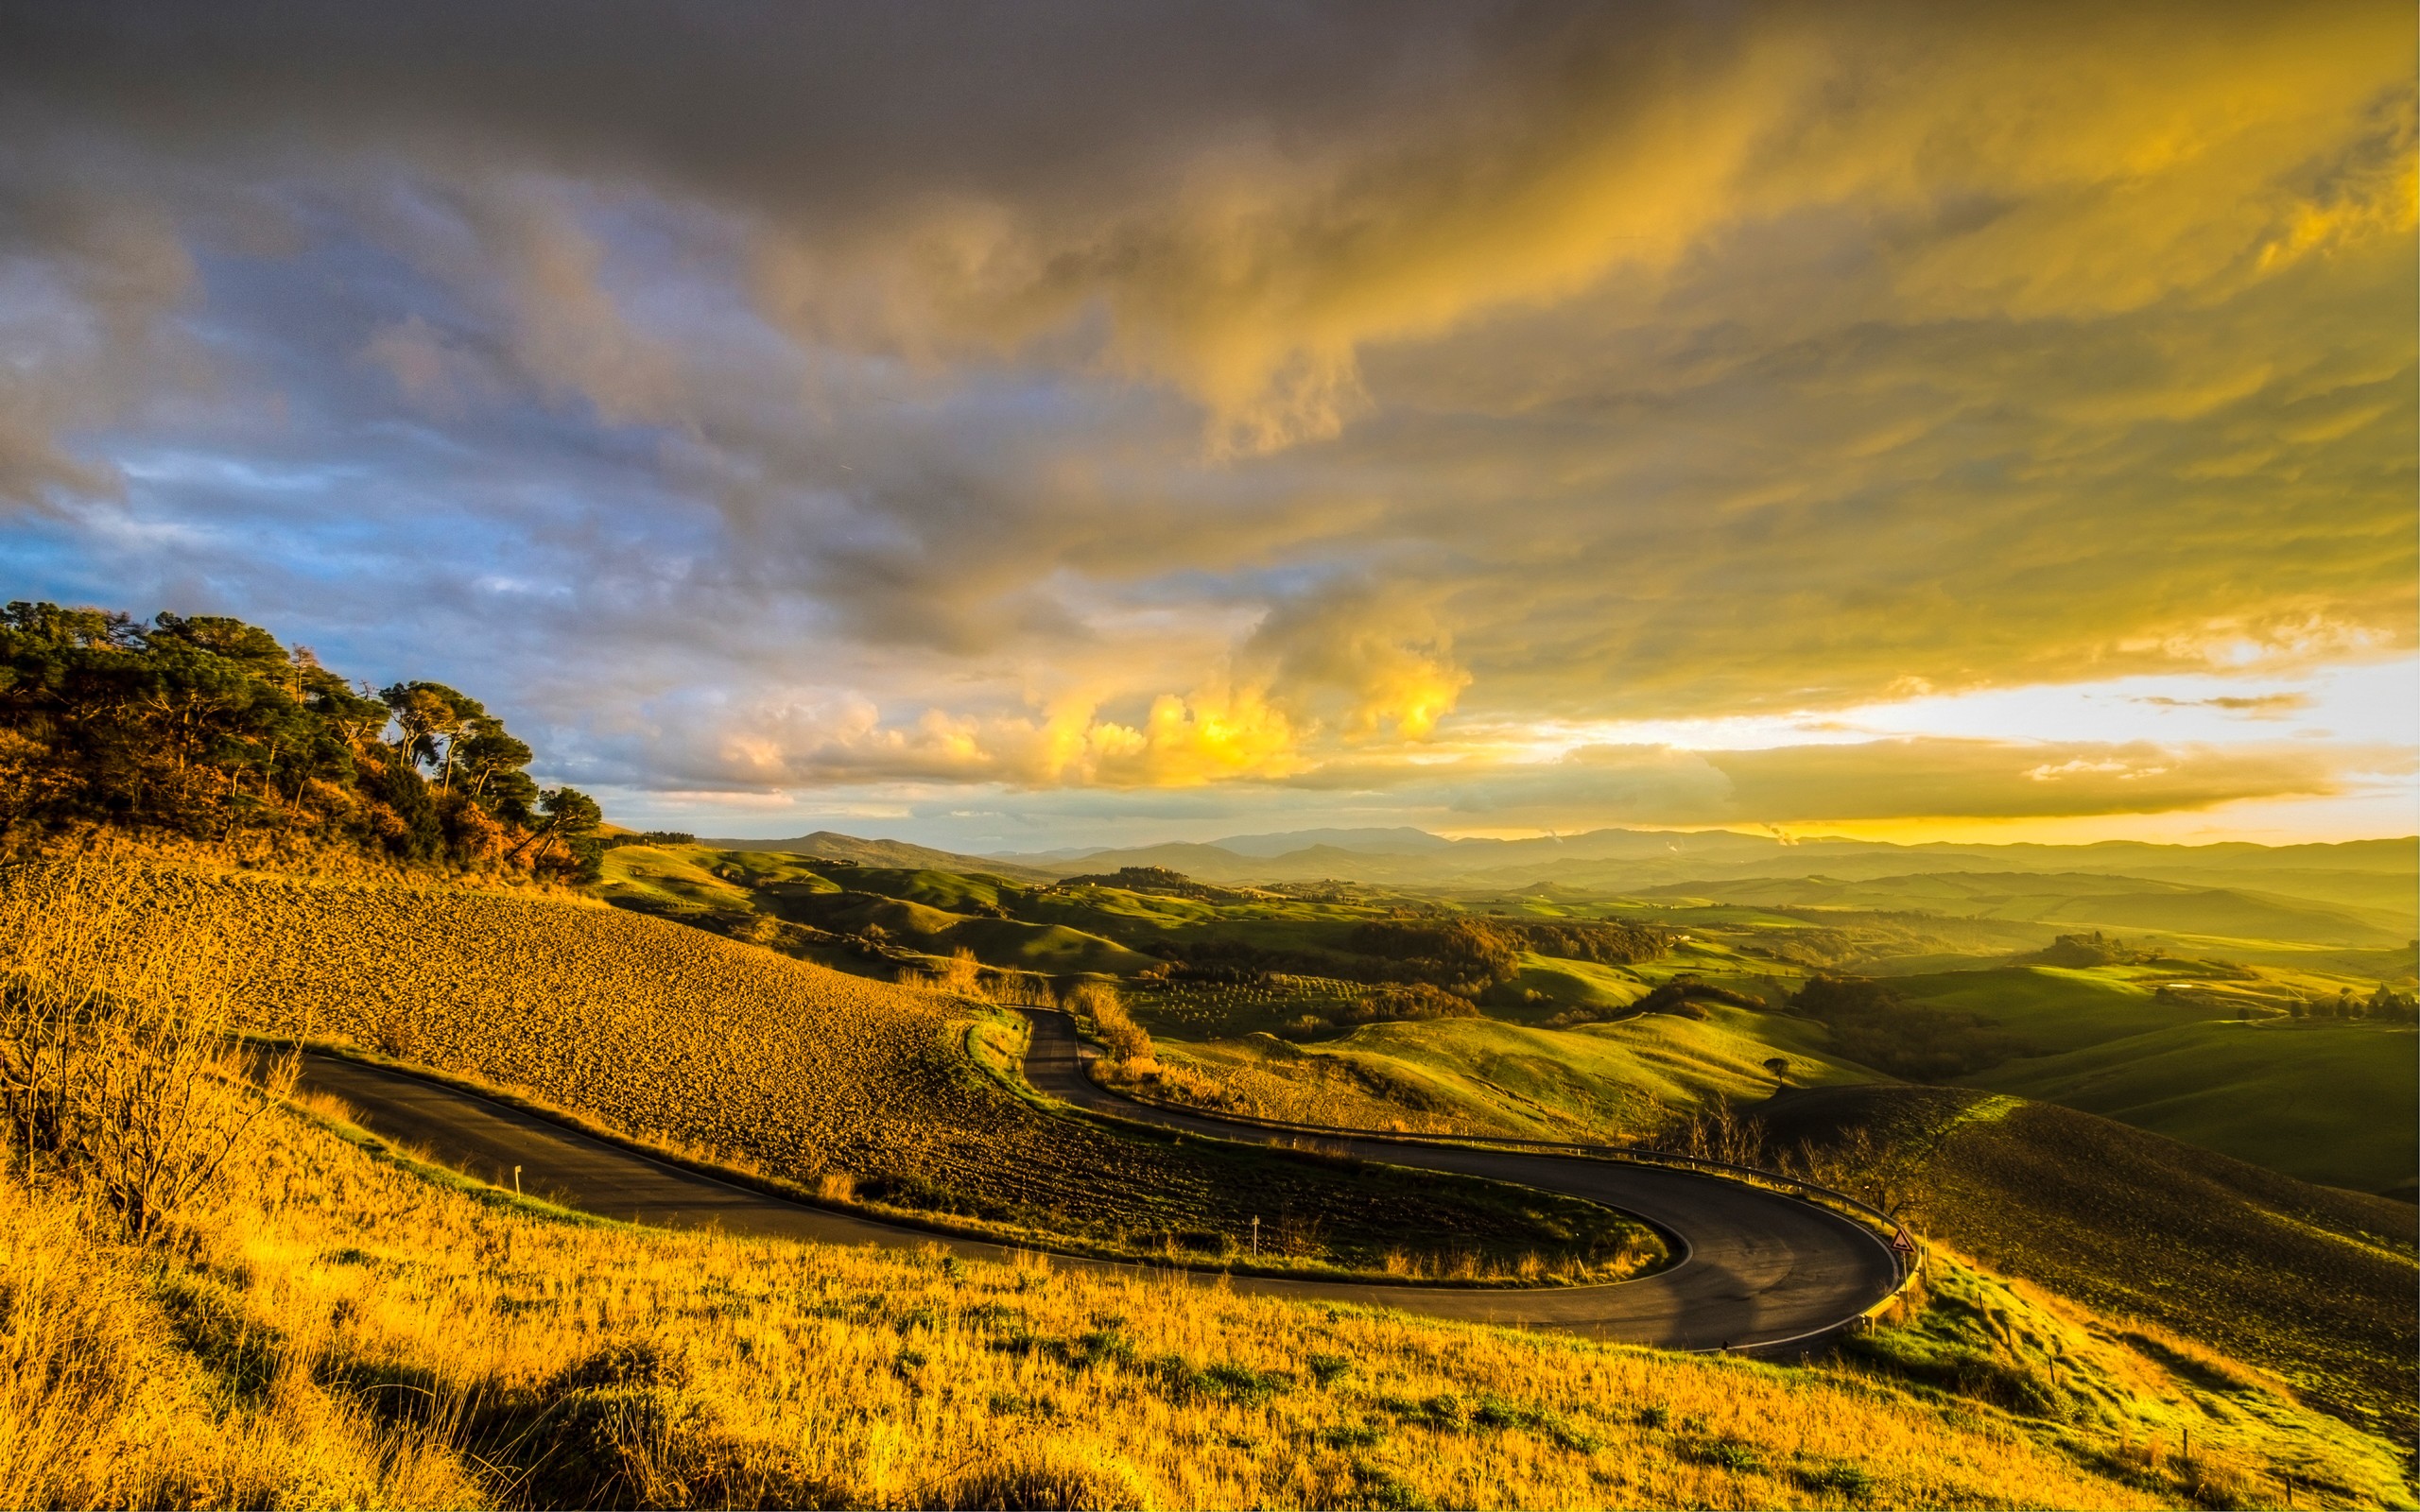 General 2560x1600 nature Italy hills sunlight field road clouds trees Tuscany sunset